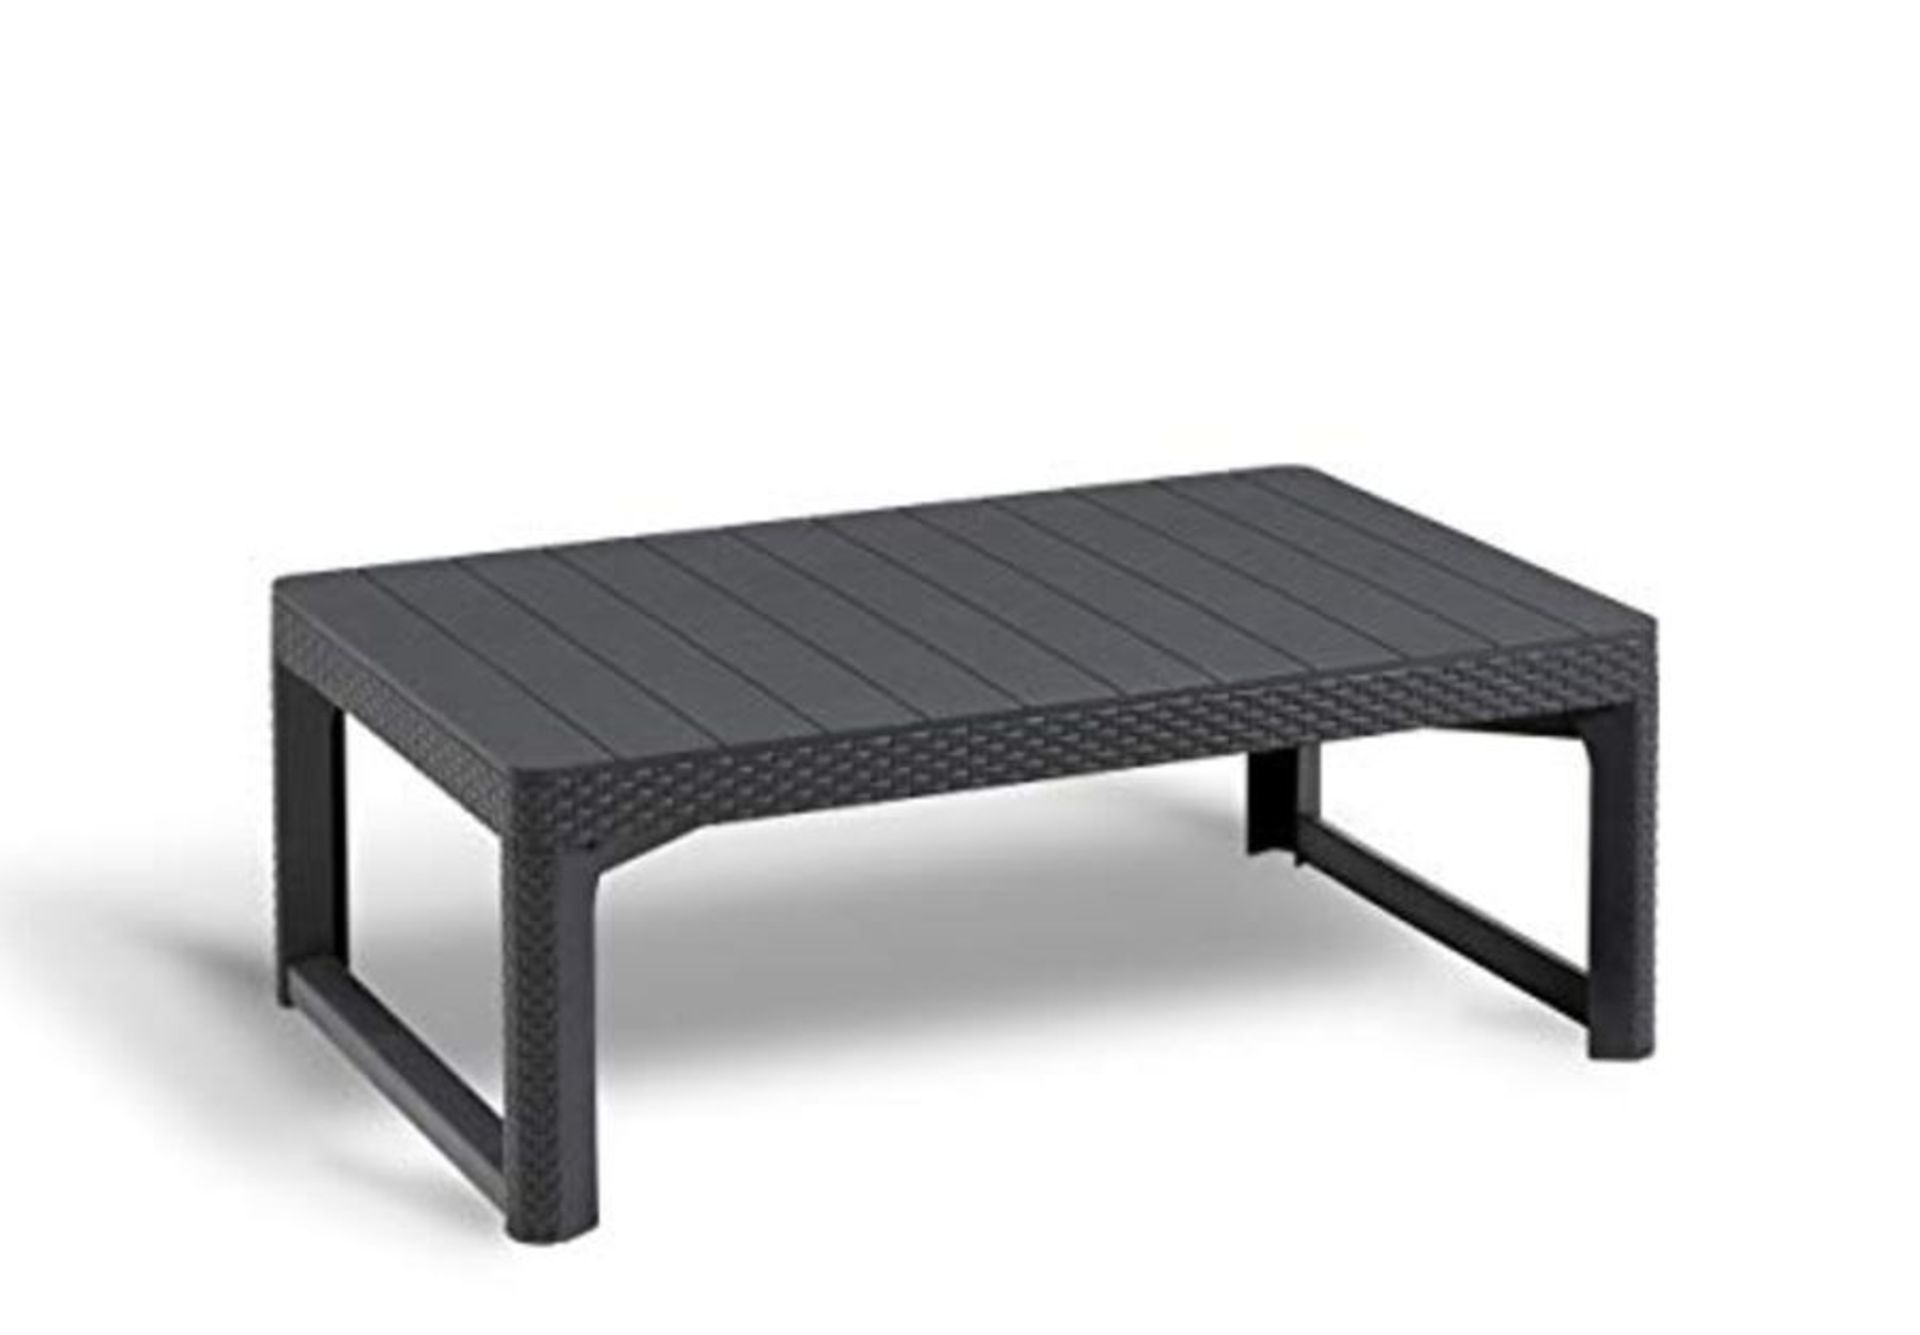 RRP £89.00 Allibert by Keter Wicker Effect Lyon 2-in-1 Outdoor Garden Dining/Coffee Table - Graph